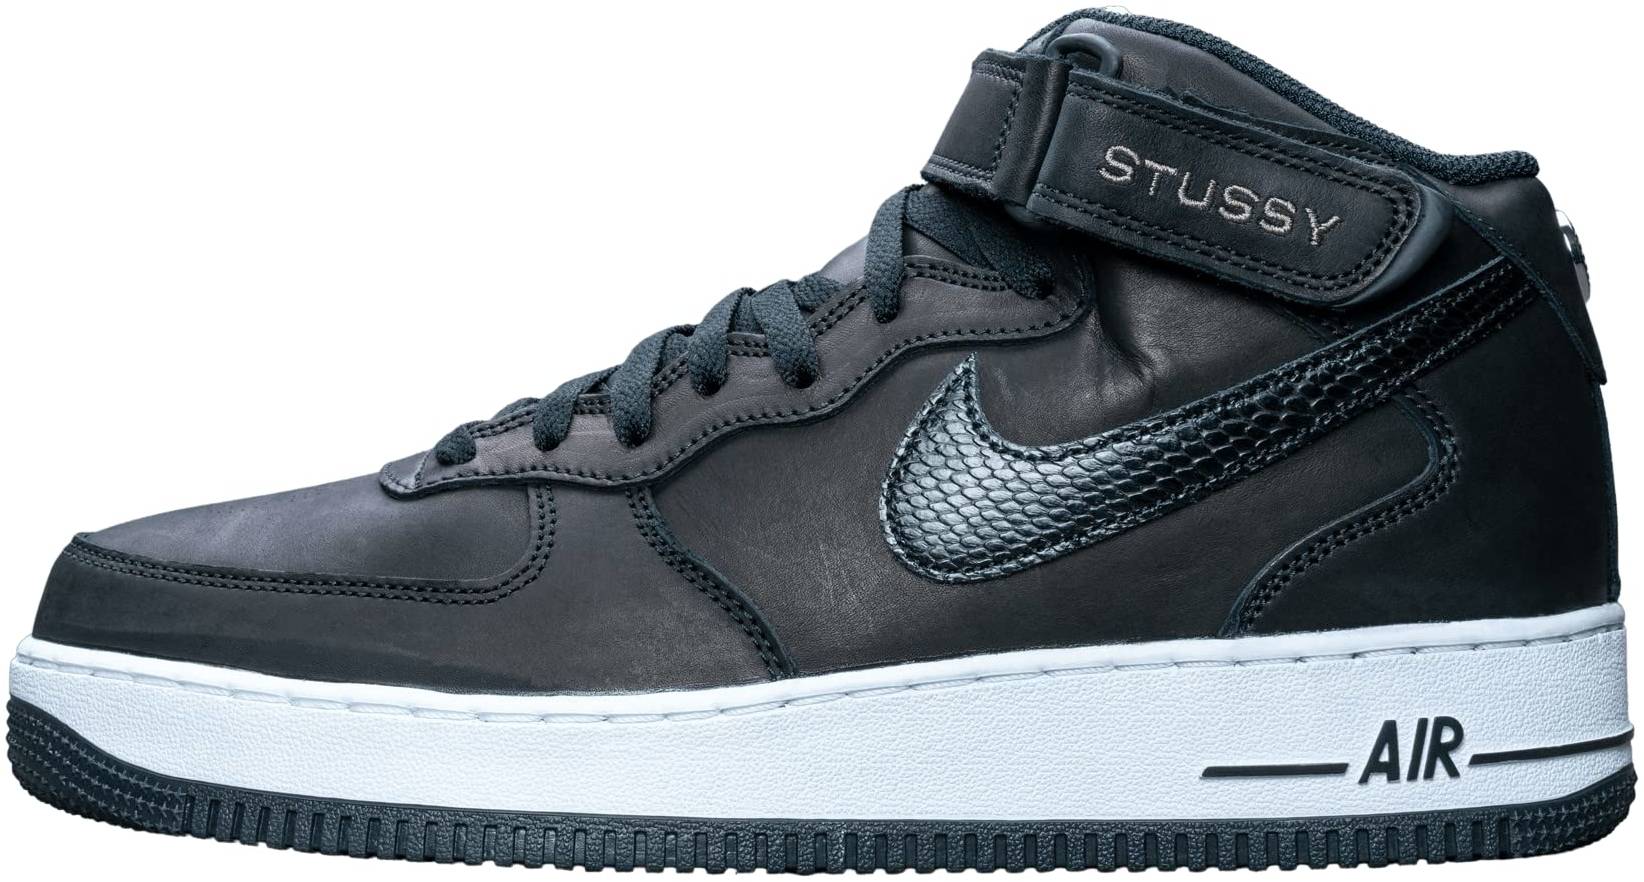 A 'Fossil' Colourway Joins the Stussy x Nike Air Force 1 Mid Pack - Sneaker  Freaker